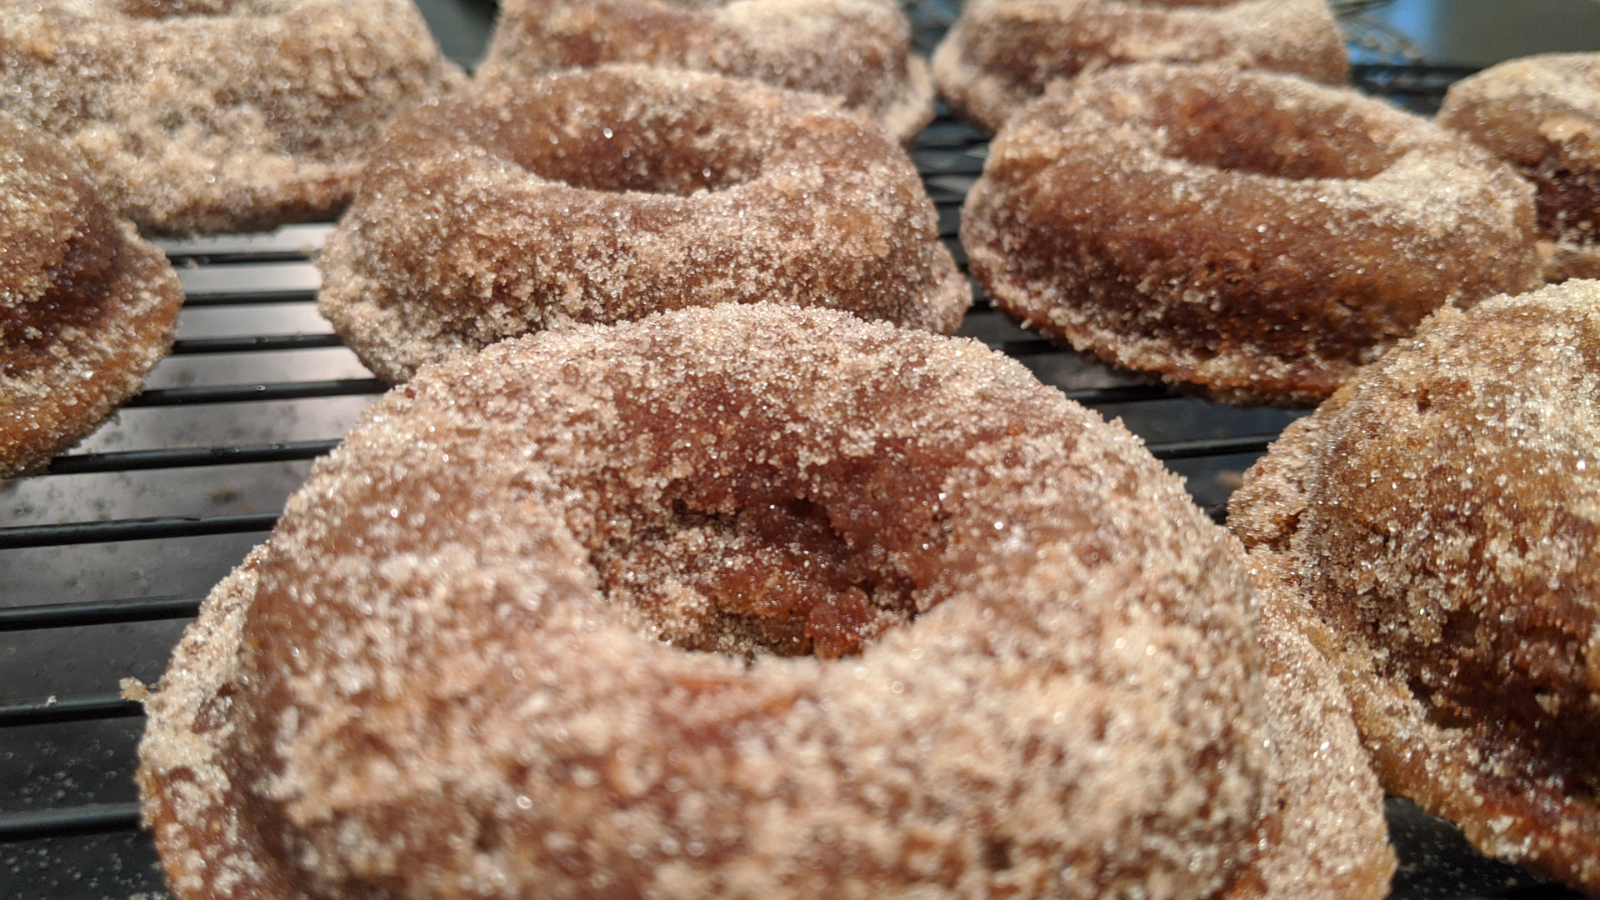 15 Top Images Market Basket Apple Cider Donuts - Plymouth Orchards & Cider Mill, Organic Apple Farm in ...